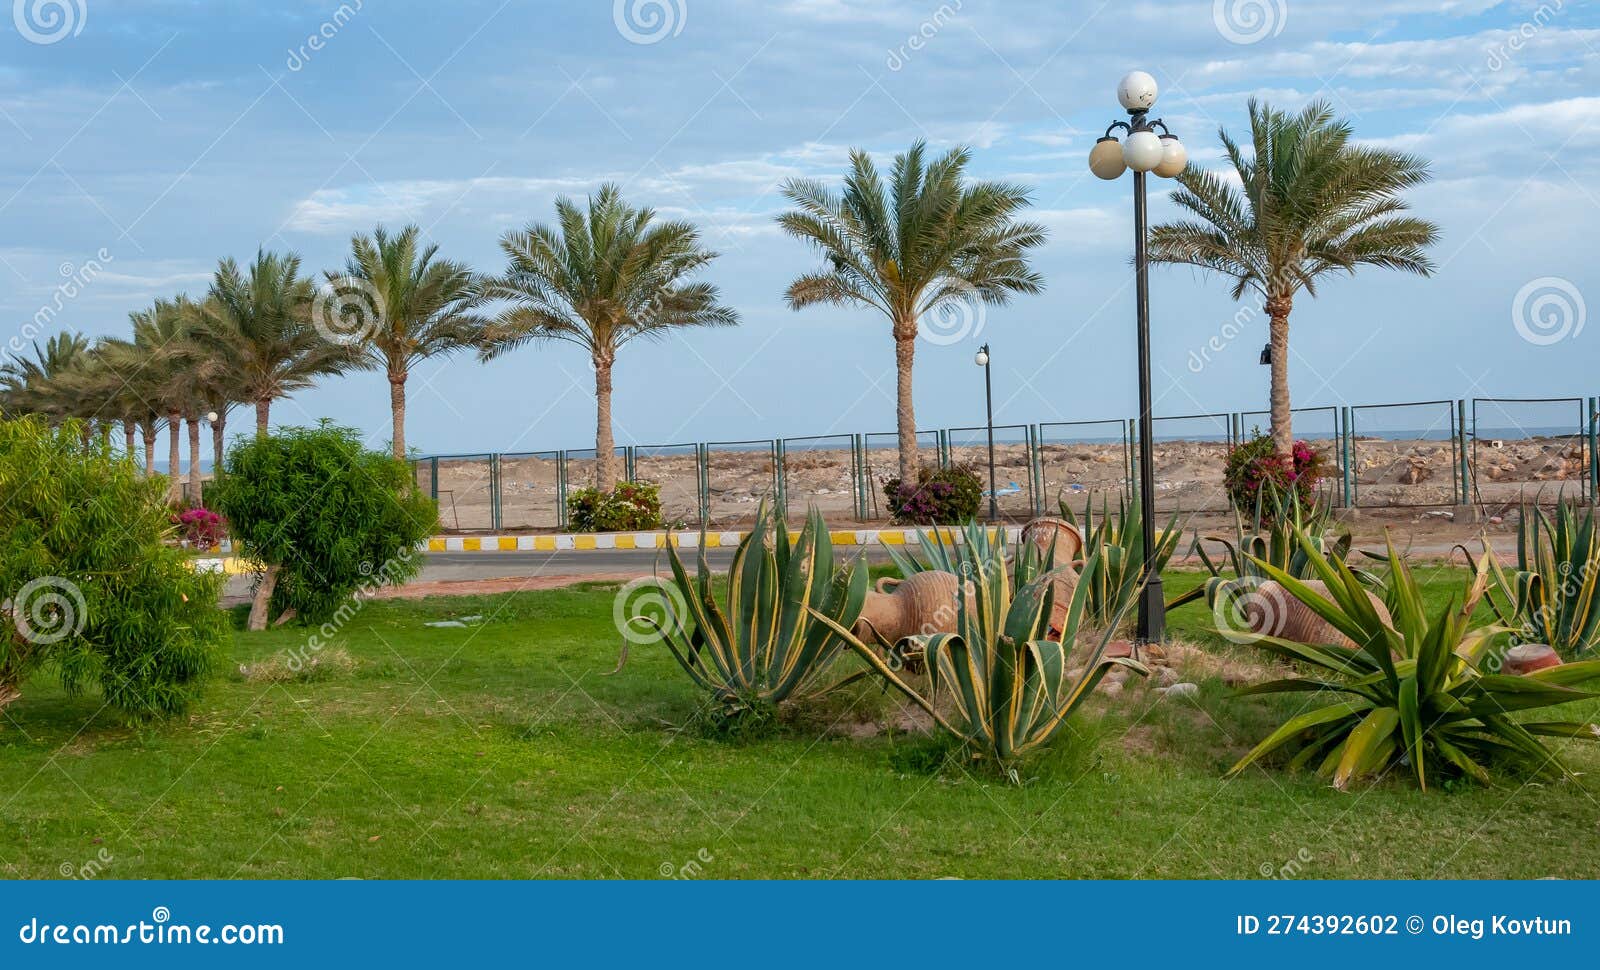 egypt - february 27, 2019: cacti in a flowerbed in the interior and  of the courtyard of a hotel in marsa alama, egypt